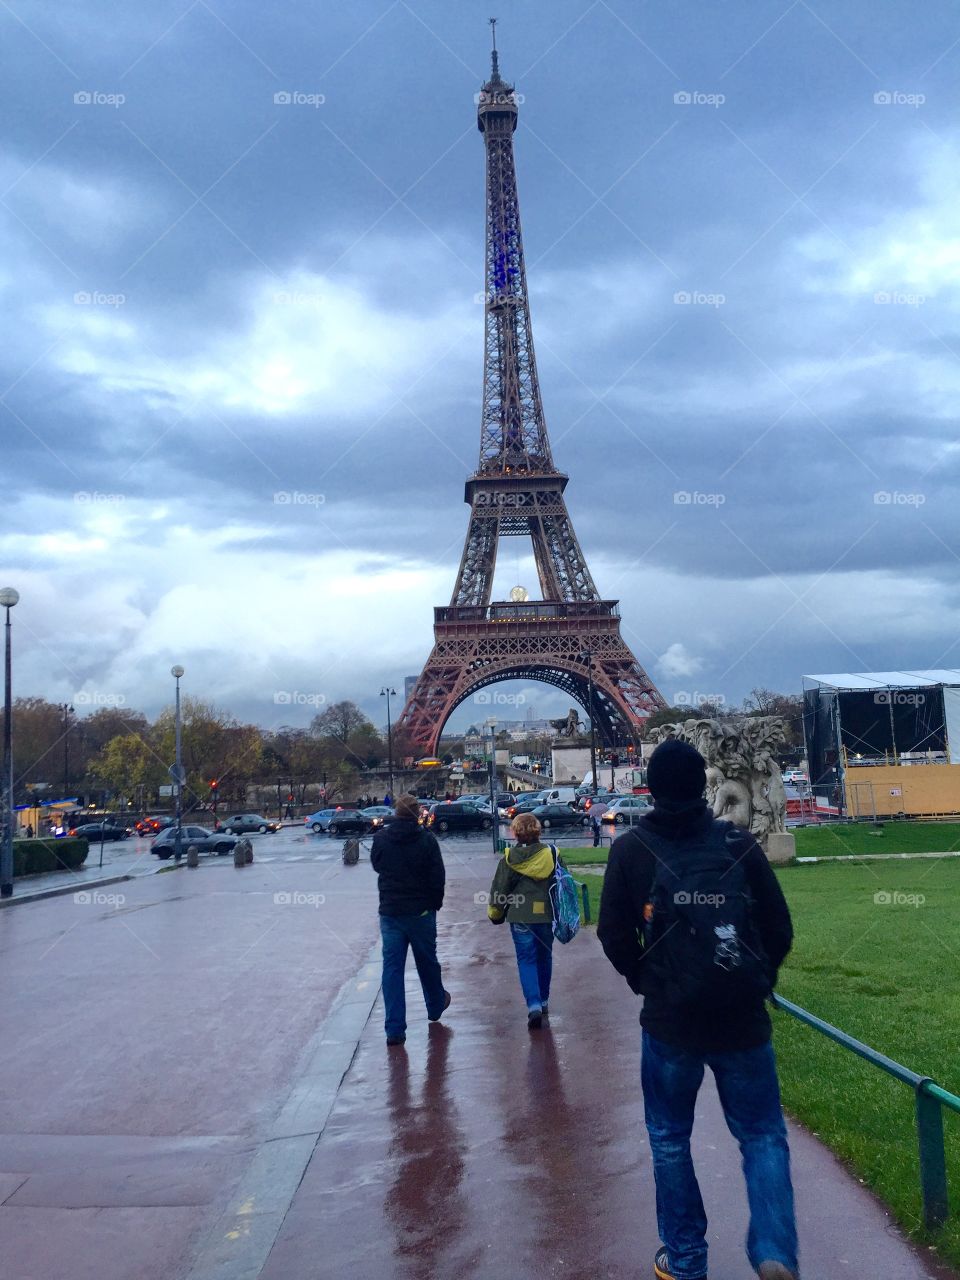 Seeing the Eiffel Tower for the first time.